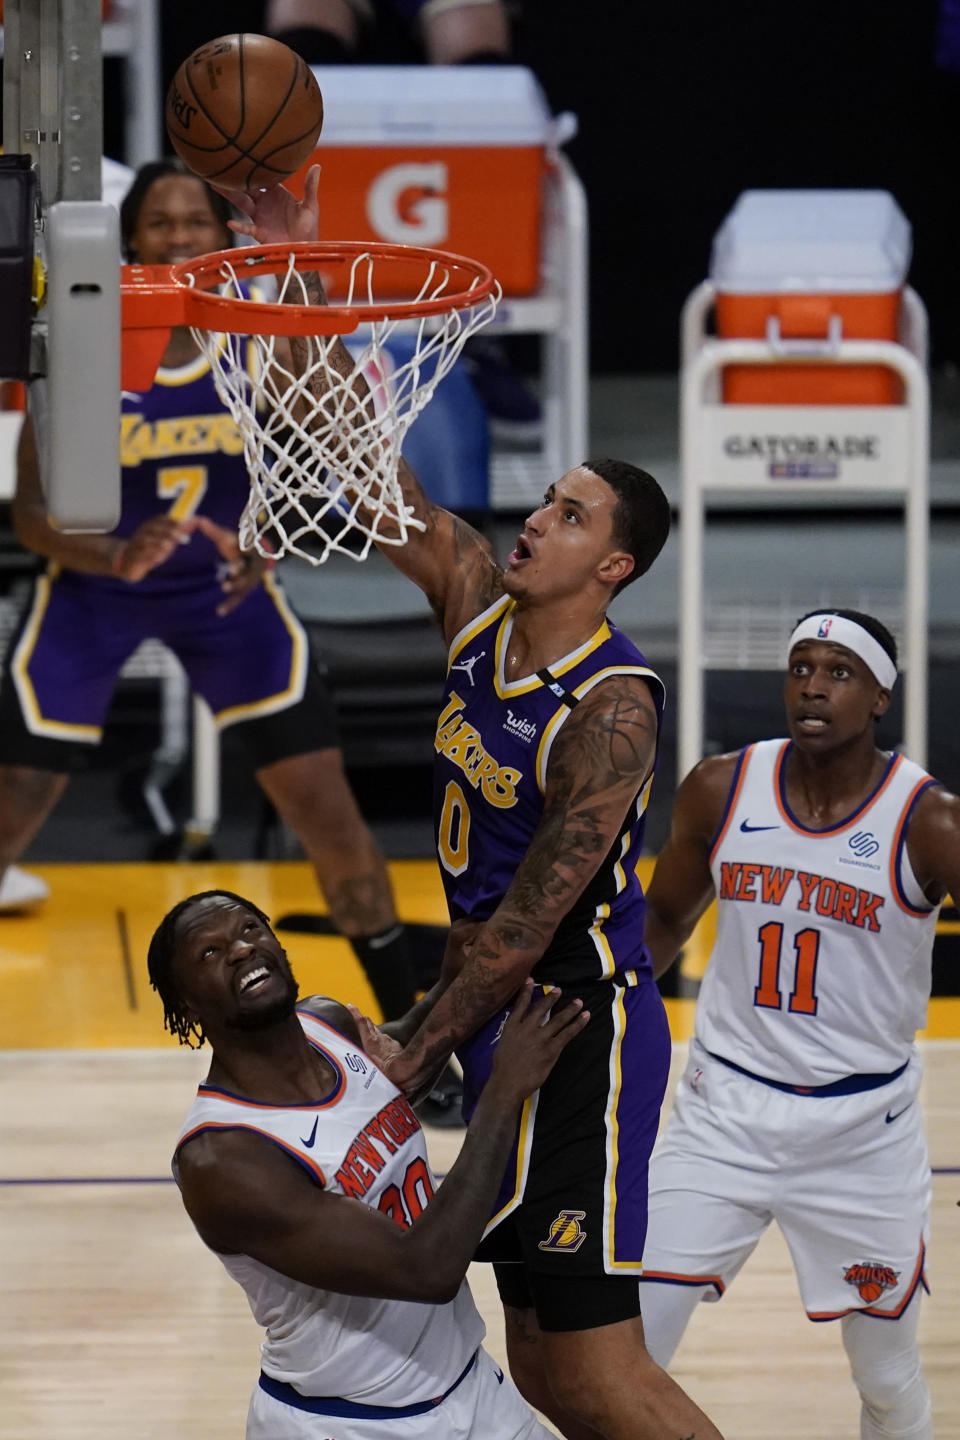 Los Angeles Lakers forward Kyle Kuzma (0) shoots against New York Knicks forward Julius Randle (30) during the second quarter of a basketball game Tuesday, May 11, 2021, in Los Angeles. (AP Photo/Ashley Landis)